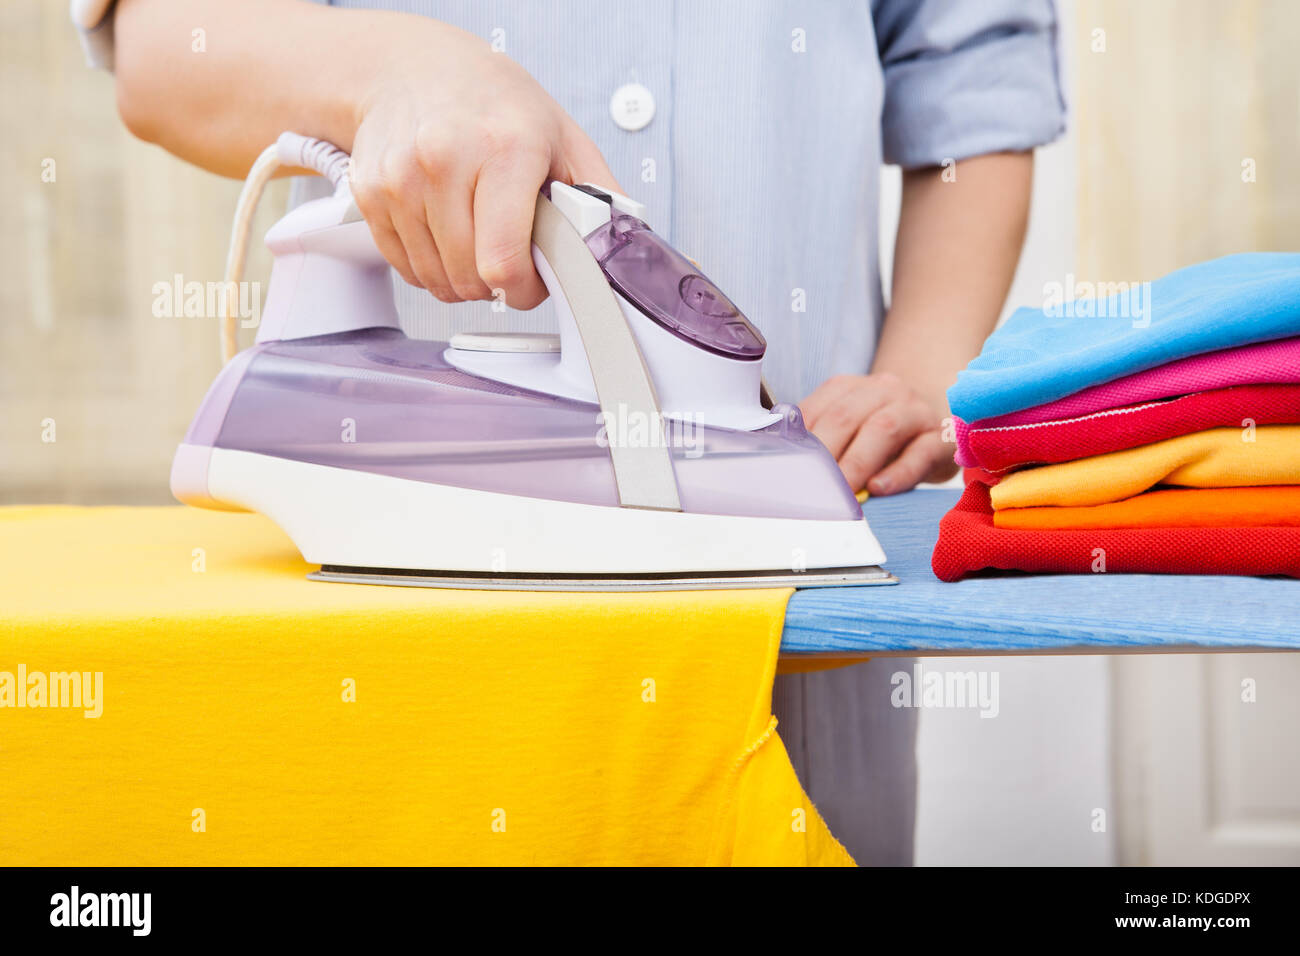 Close-up Of Woman's Hand Ironing Cloth On Ironing Board Stock Photo - Alamy